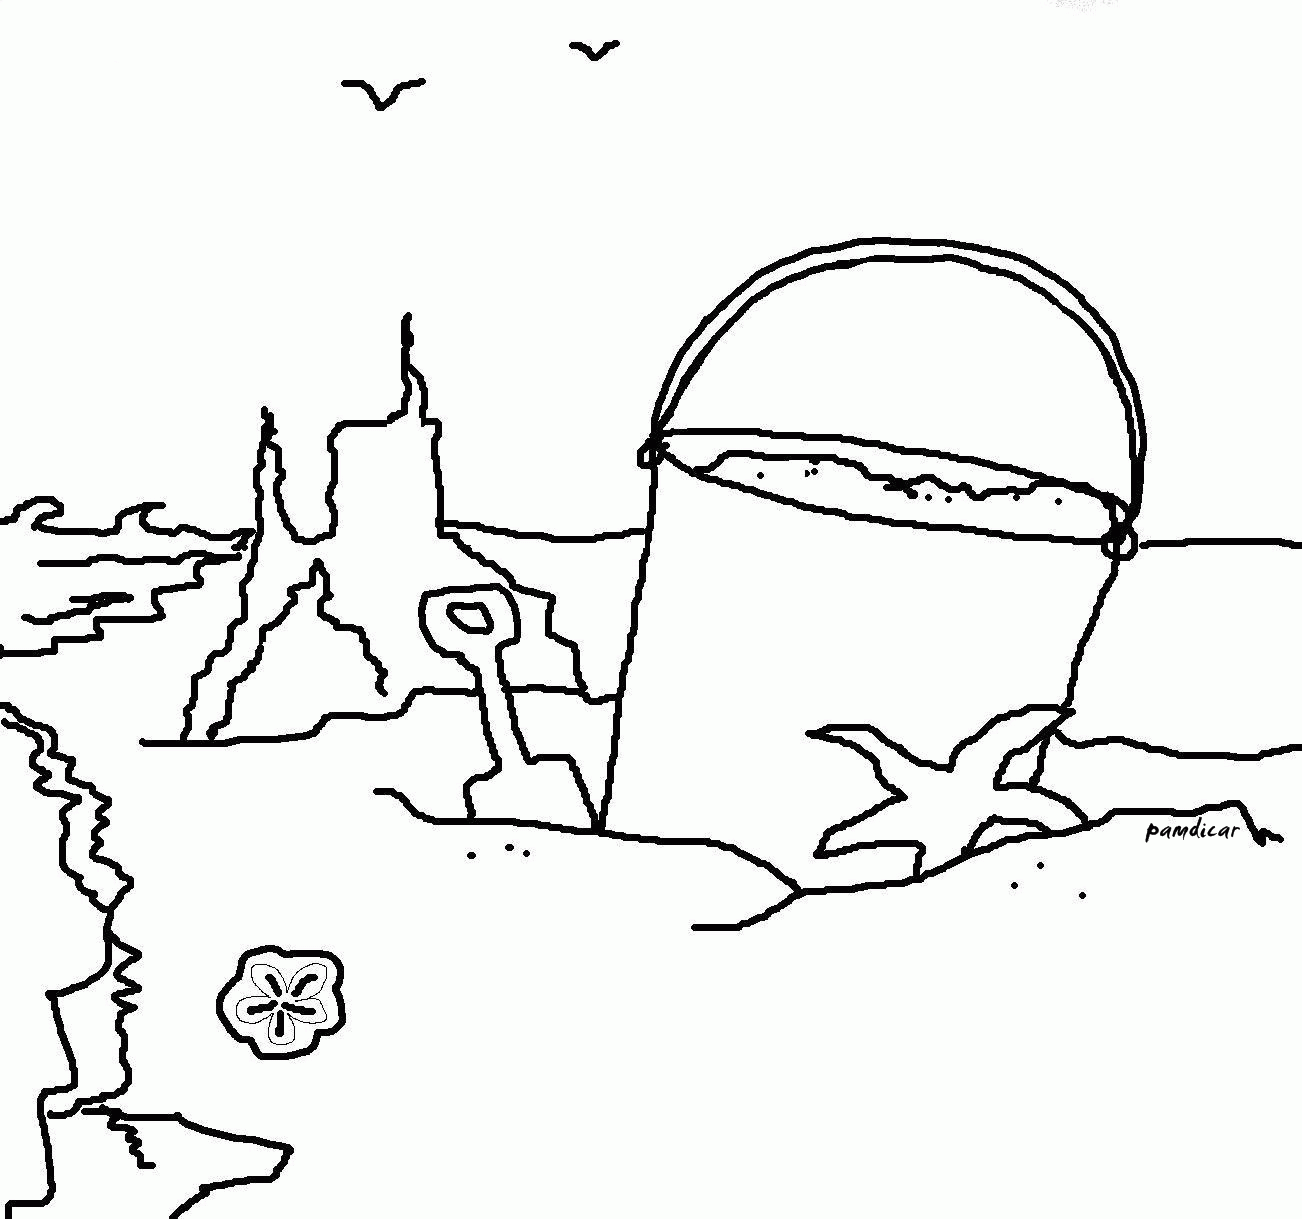 Ocean Scene Coloring Page - Coloring Home